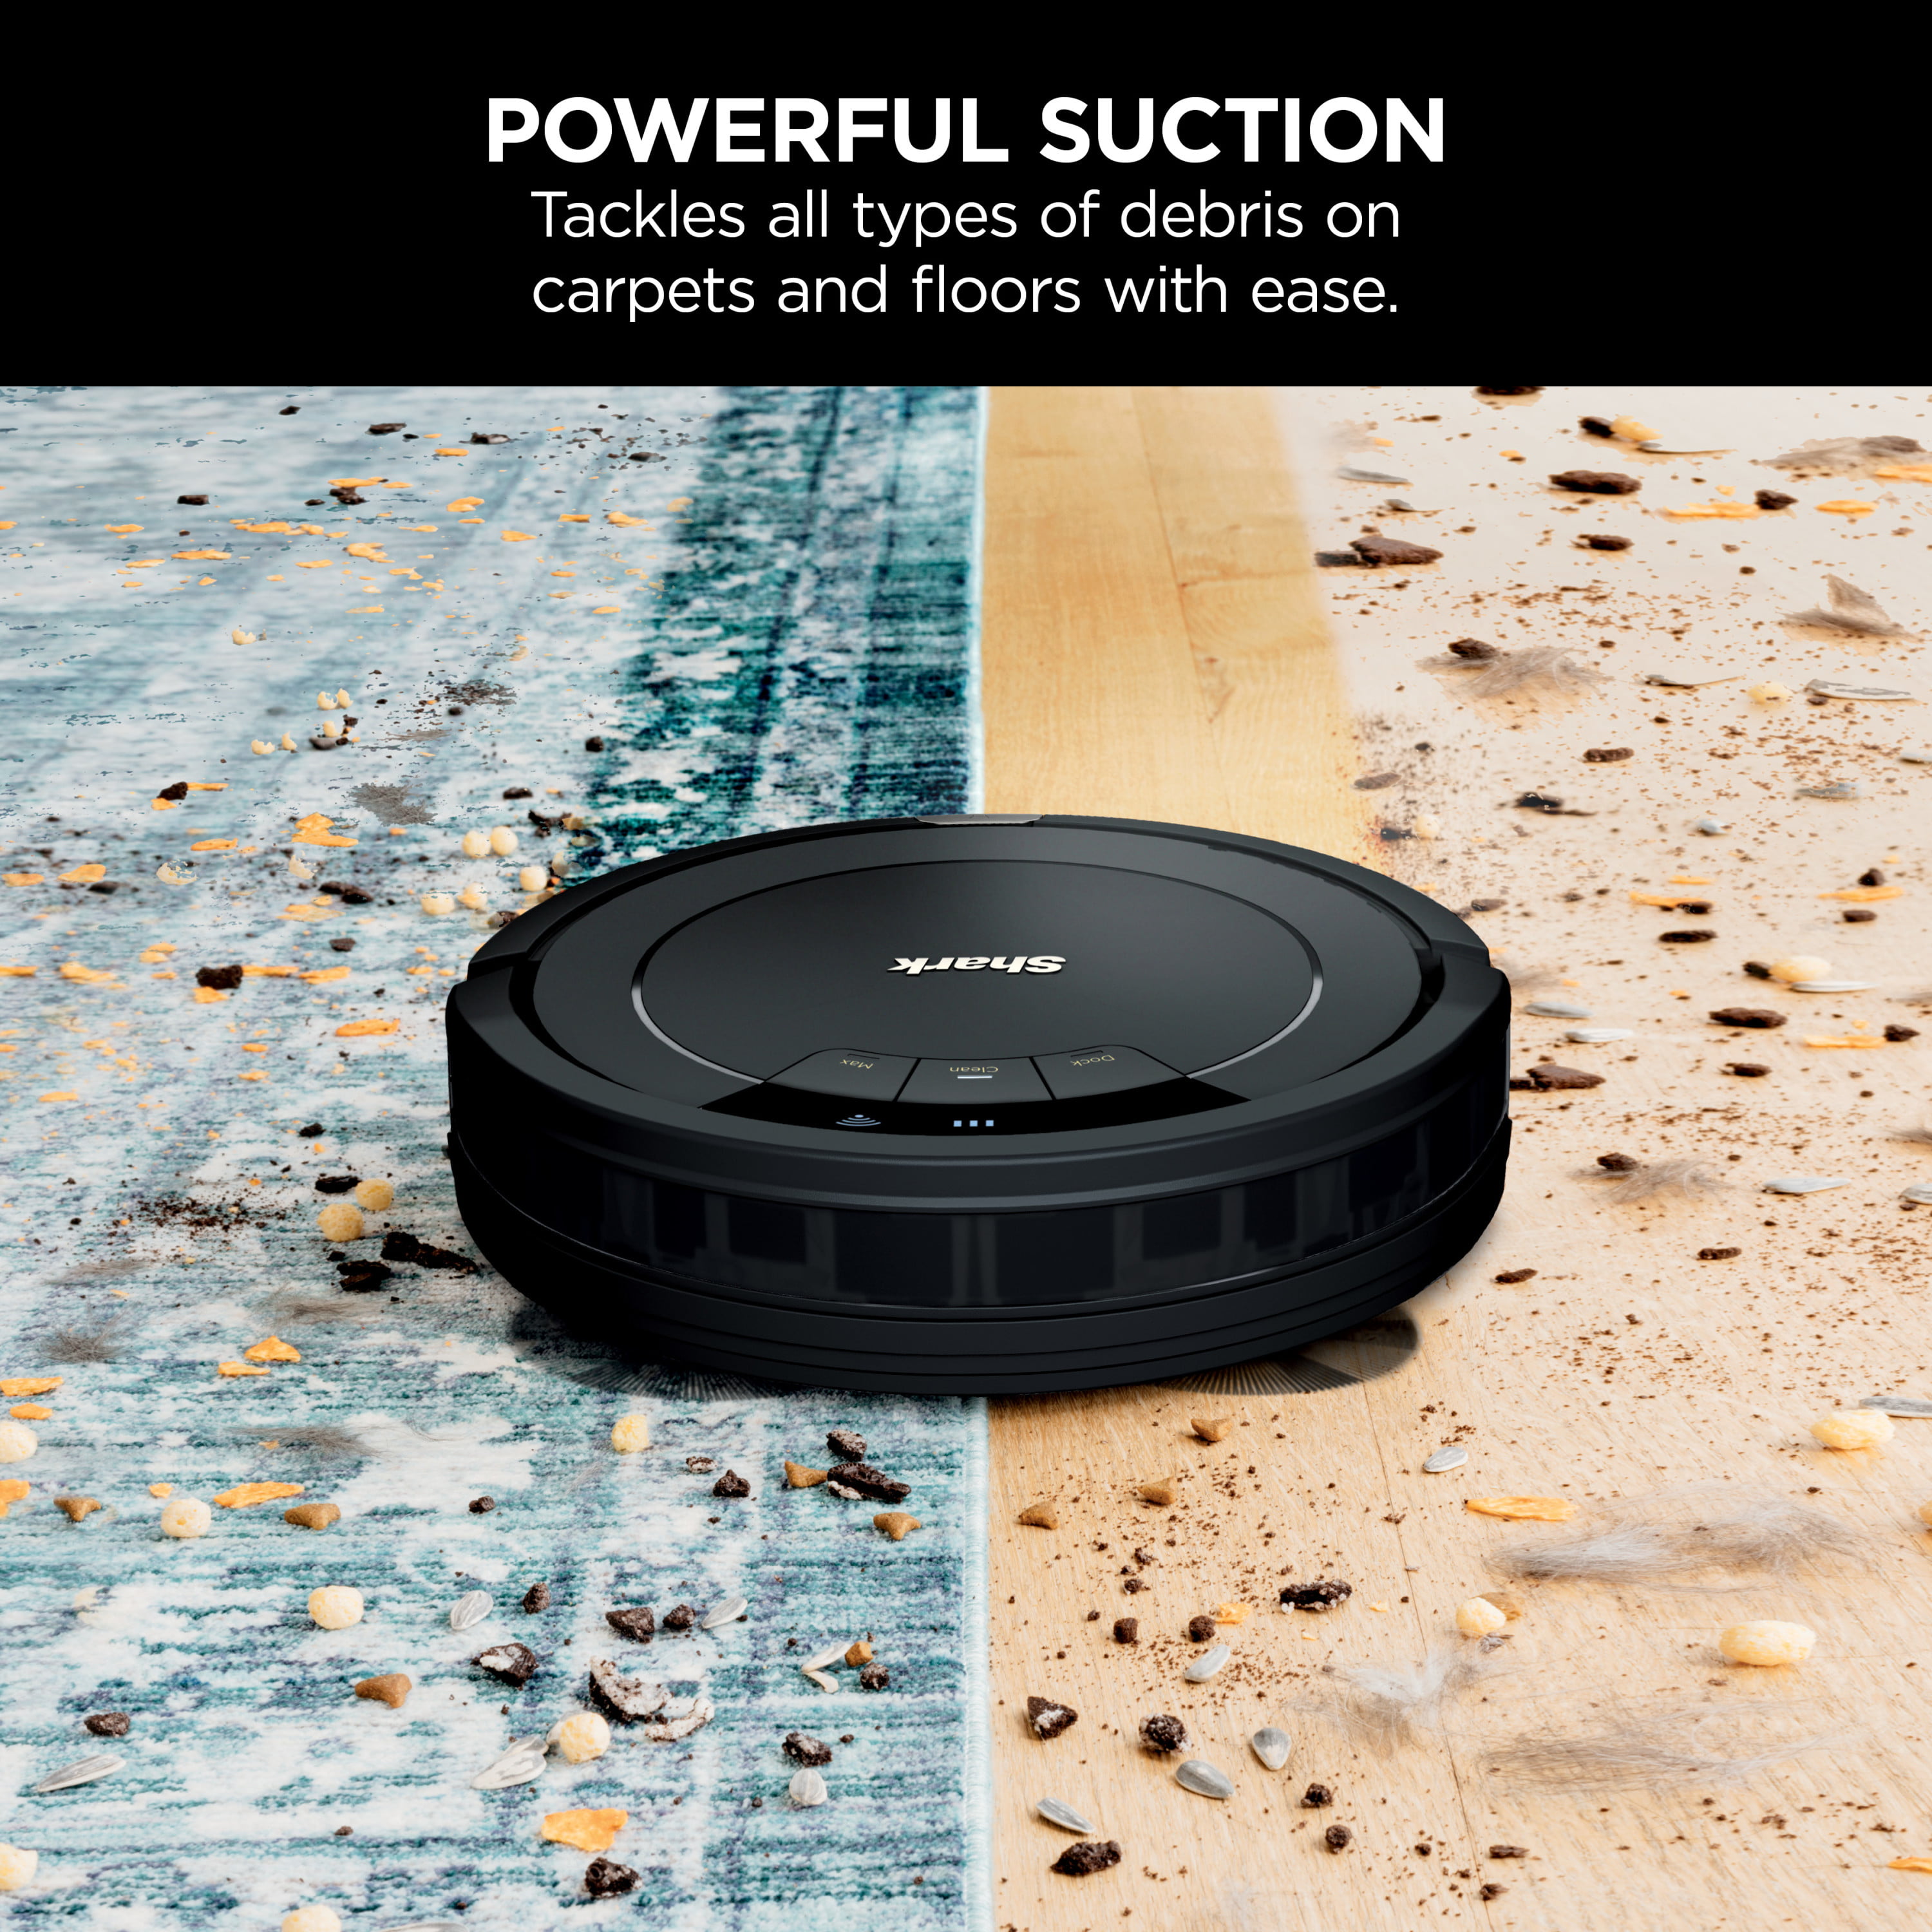 Hard Floors Wi-Fi Connected Canadian Version Black Shark RV754CA ION Robot Vacuum Works with Google Assistant Carpets Multi-Surface Cleaning 